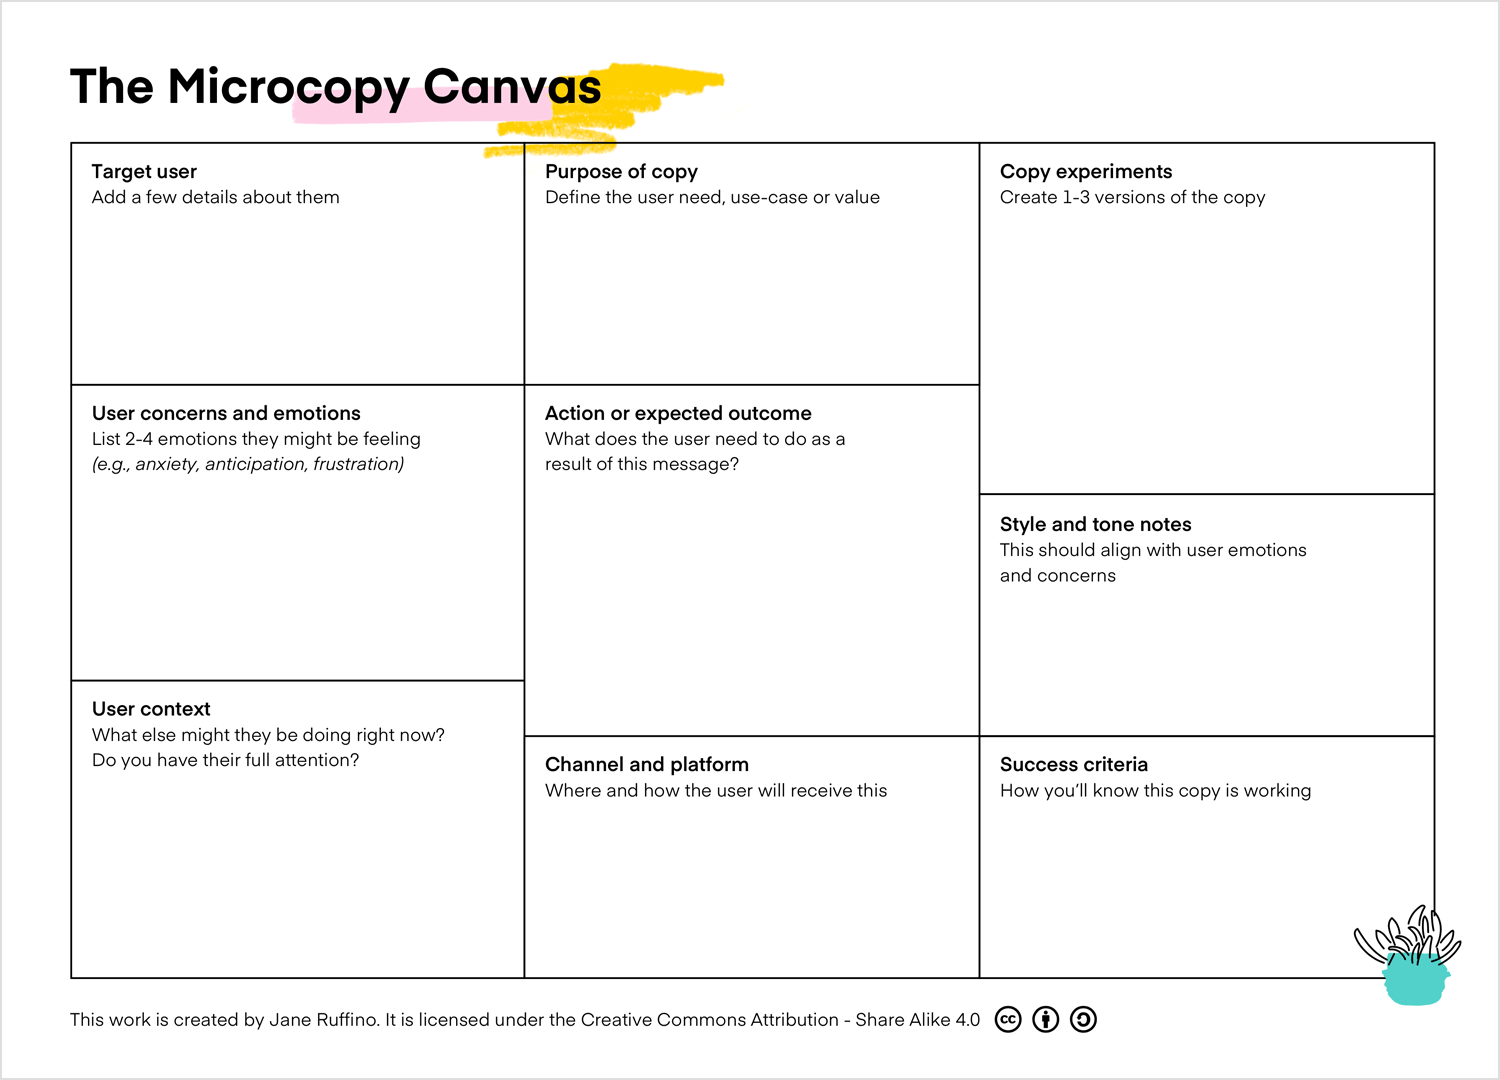 UX writing - use the Microcopy Canvas